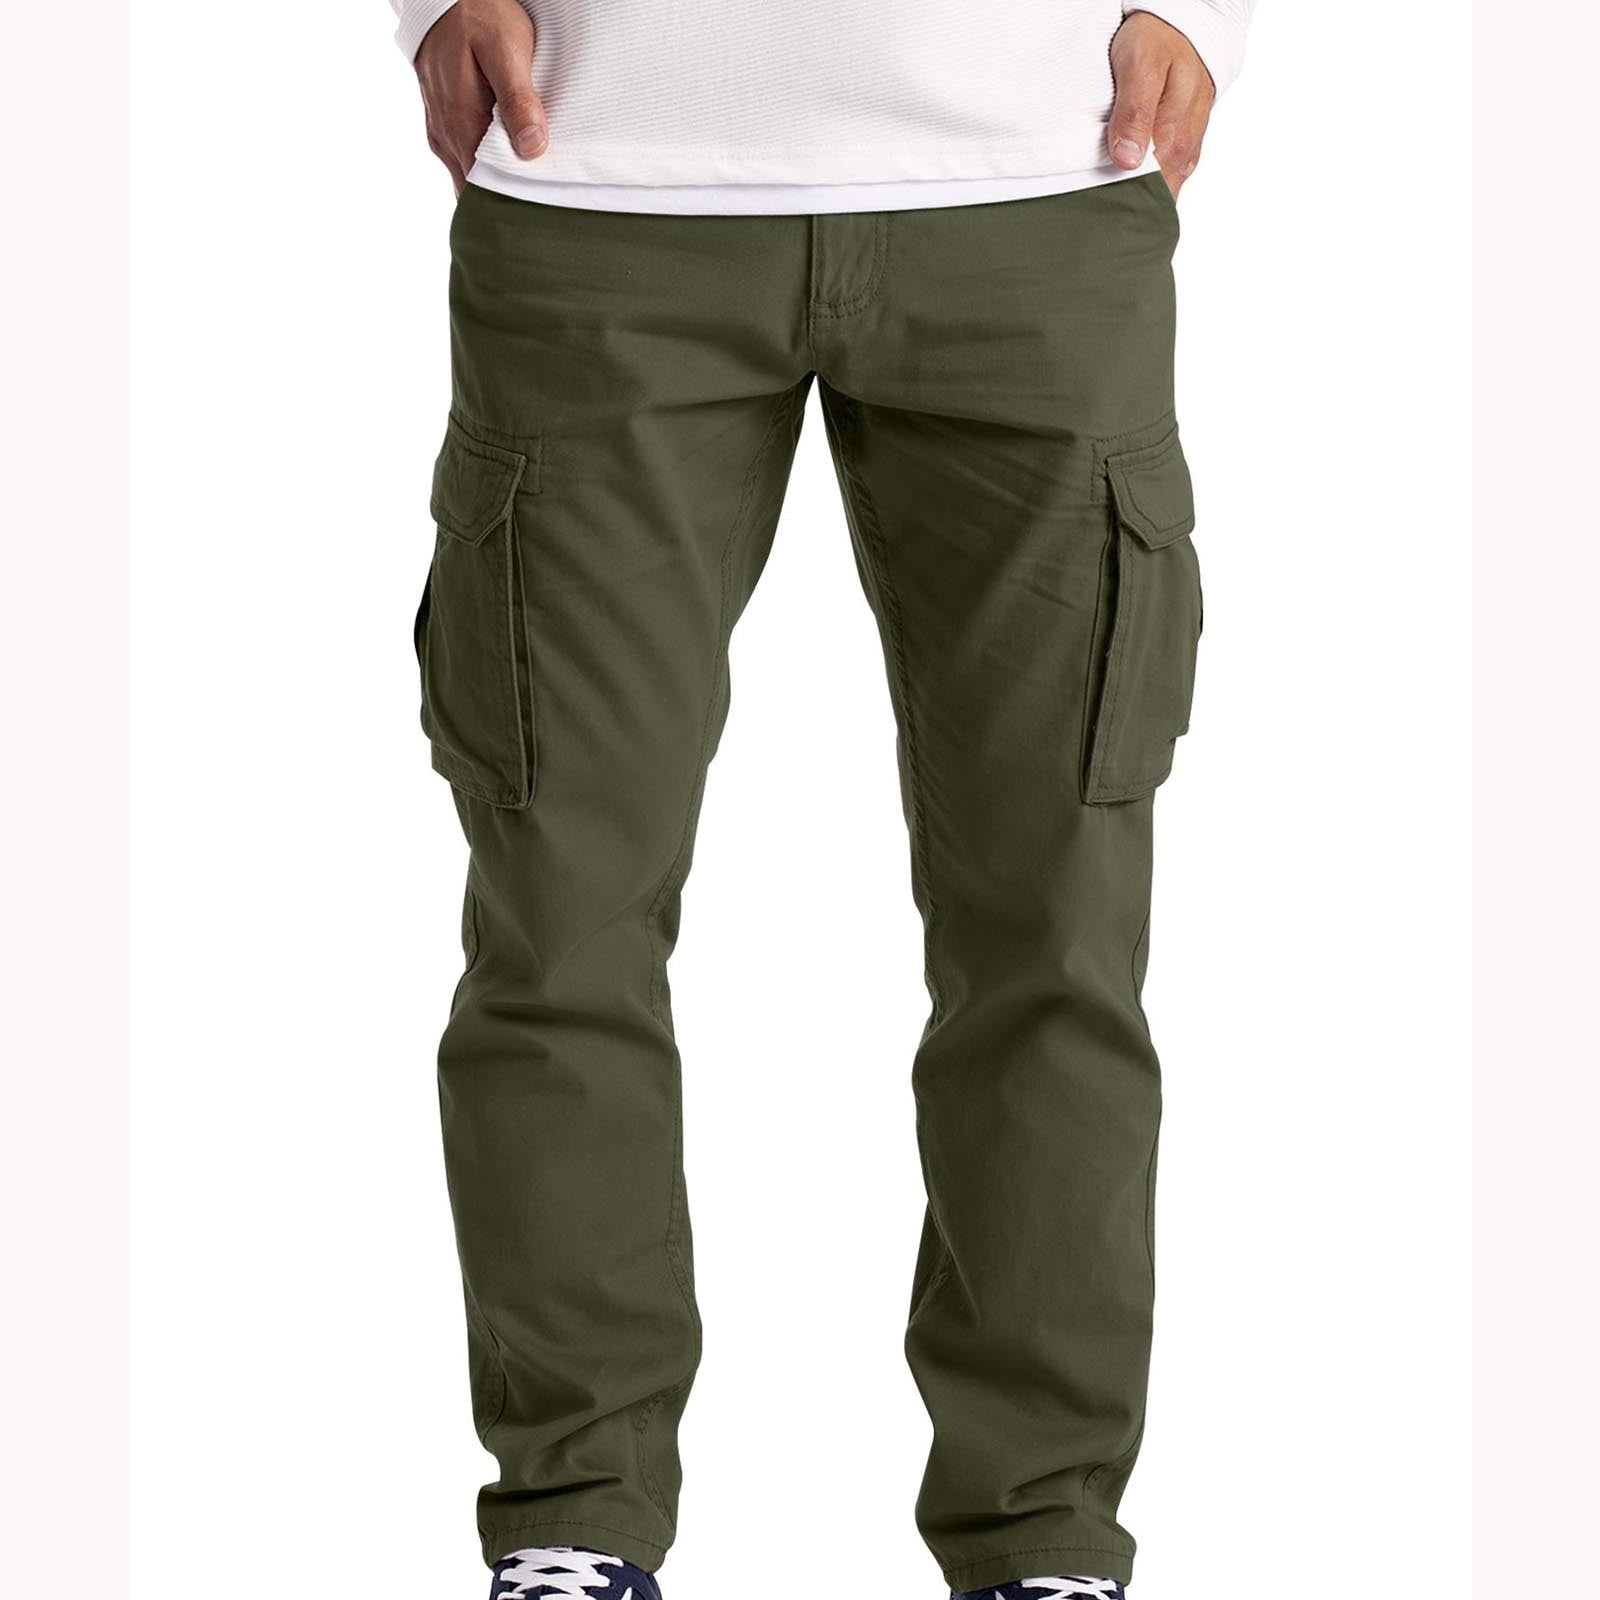 Men's Cargo Pants Straight Fit Hiking Outdoor Fishing Travel Pants Casual  Trousers with Multi Pockets